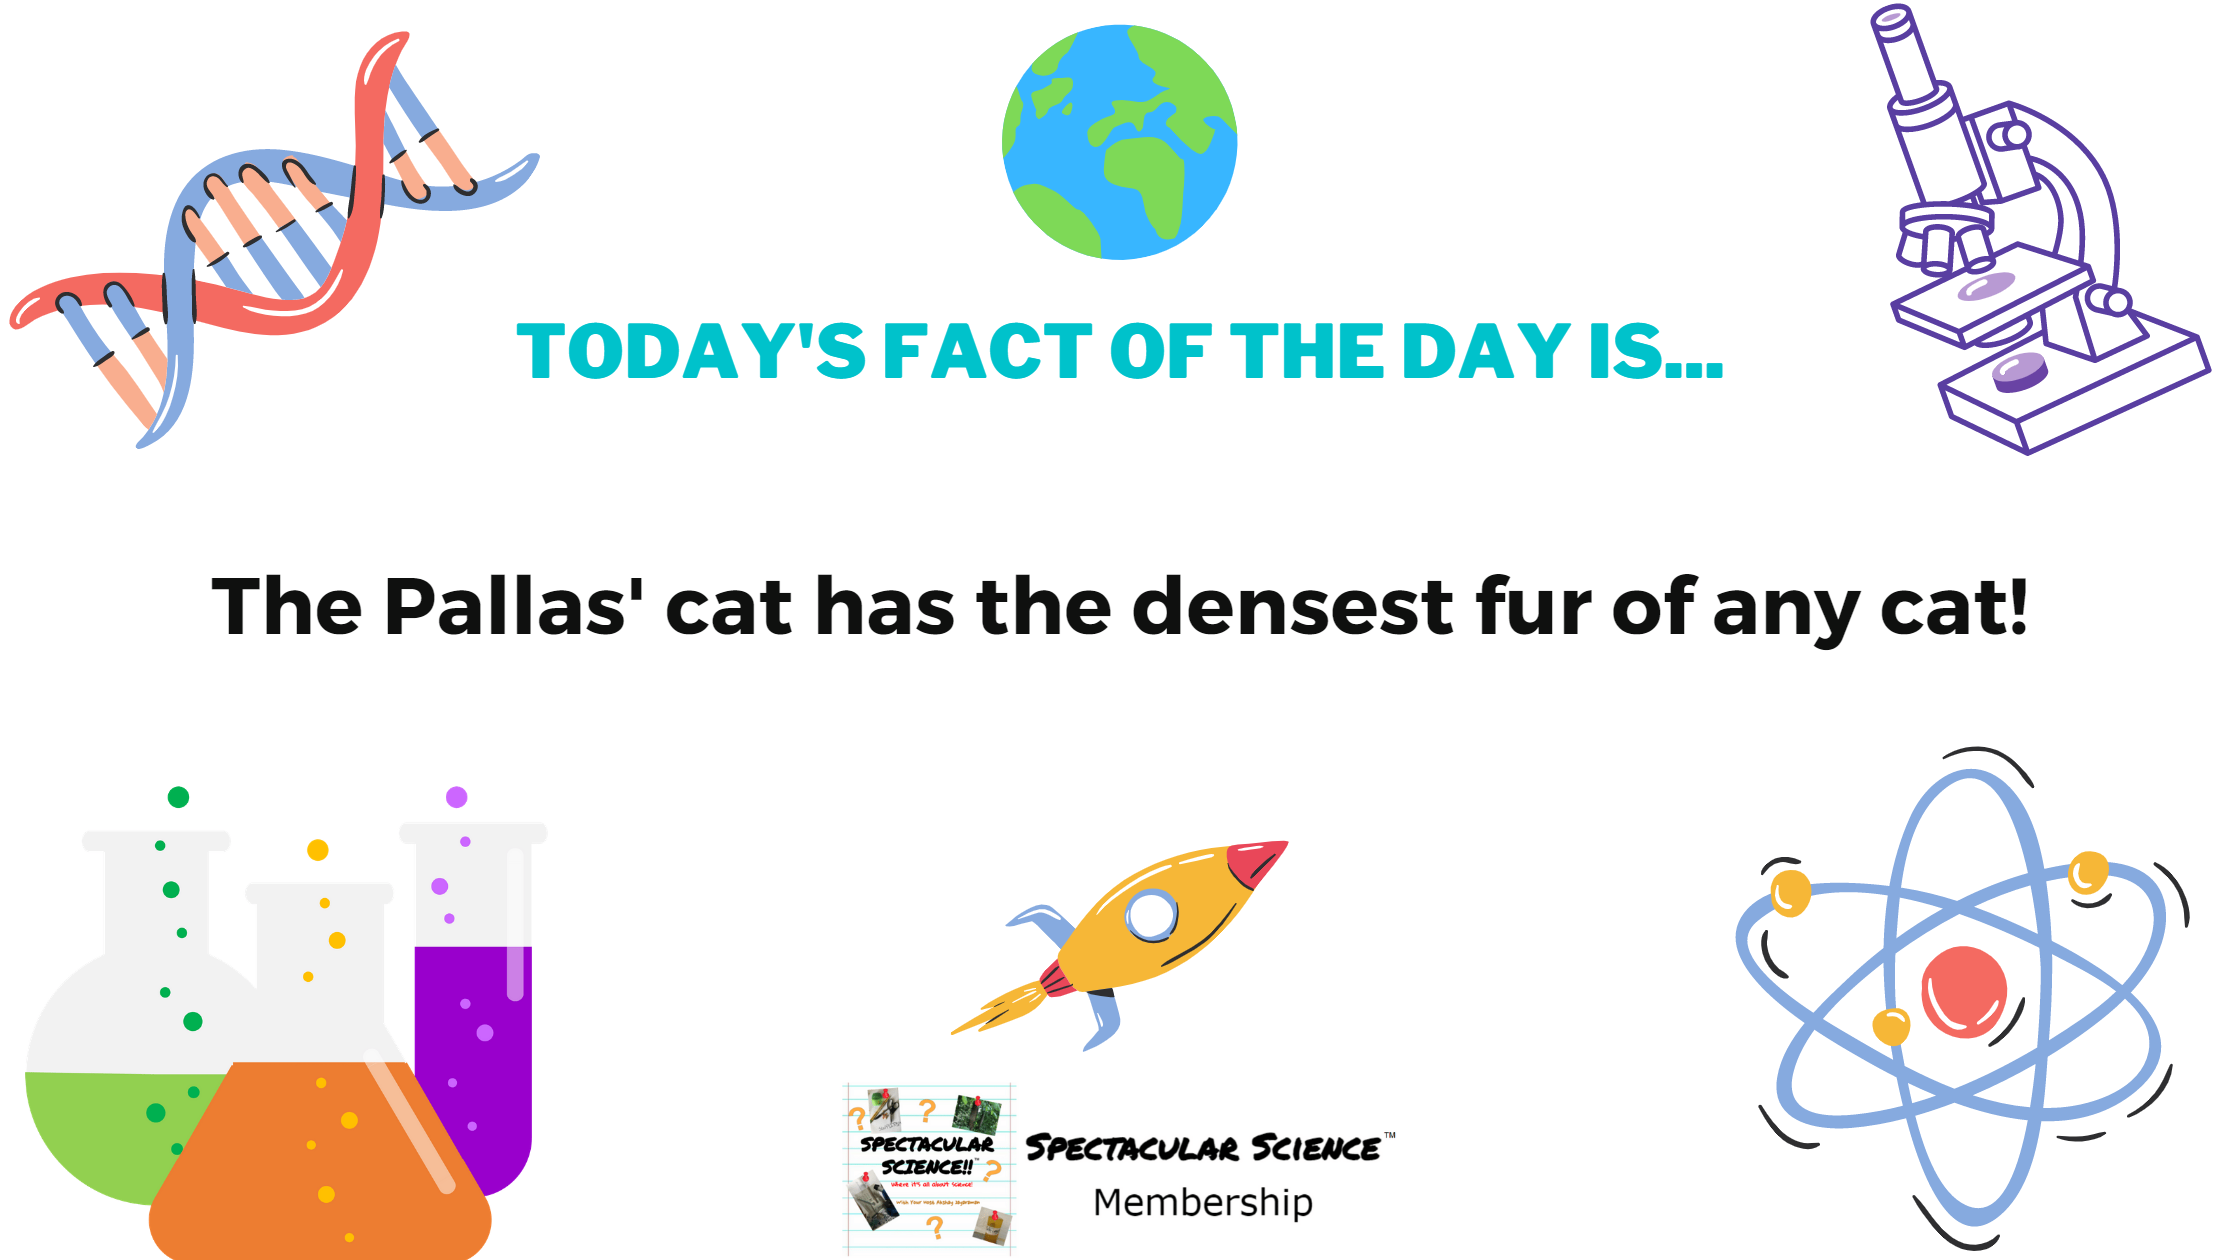 Fact of the Day Image November 29th